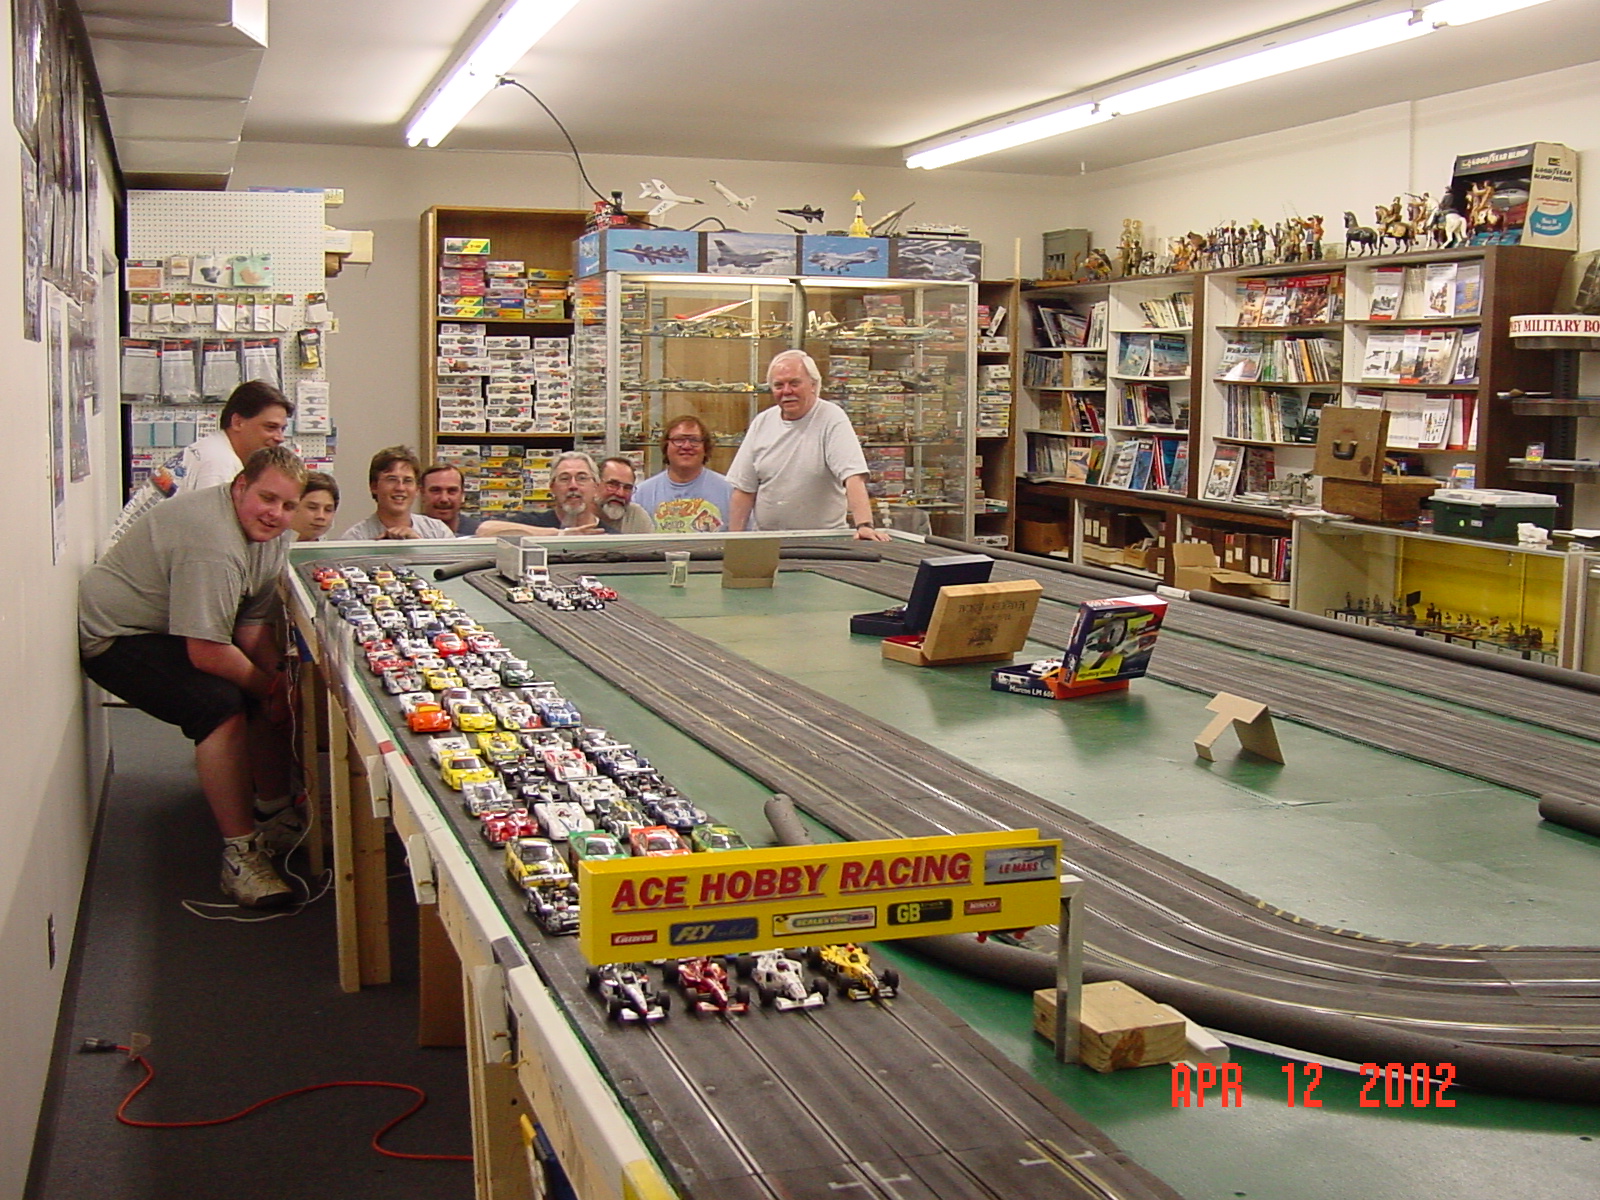 At ACE HOBBY you can RACE Scale Model Racing Cars NASCAR – SPORTS 